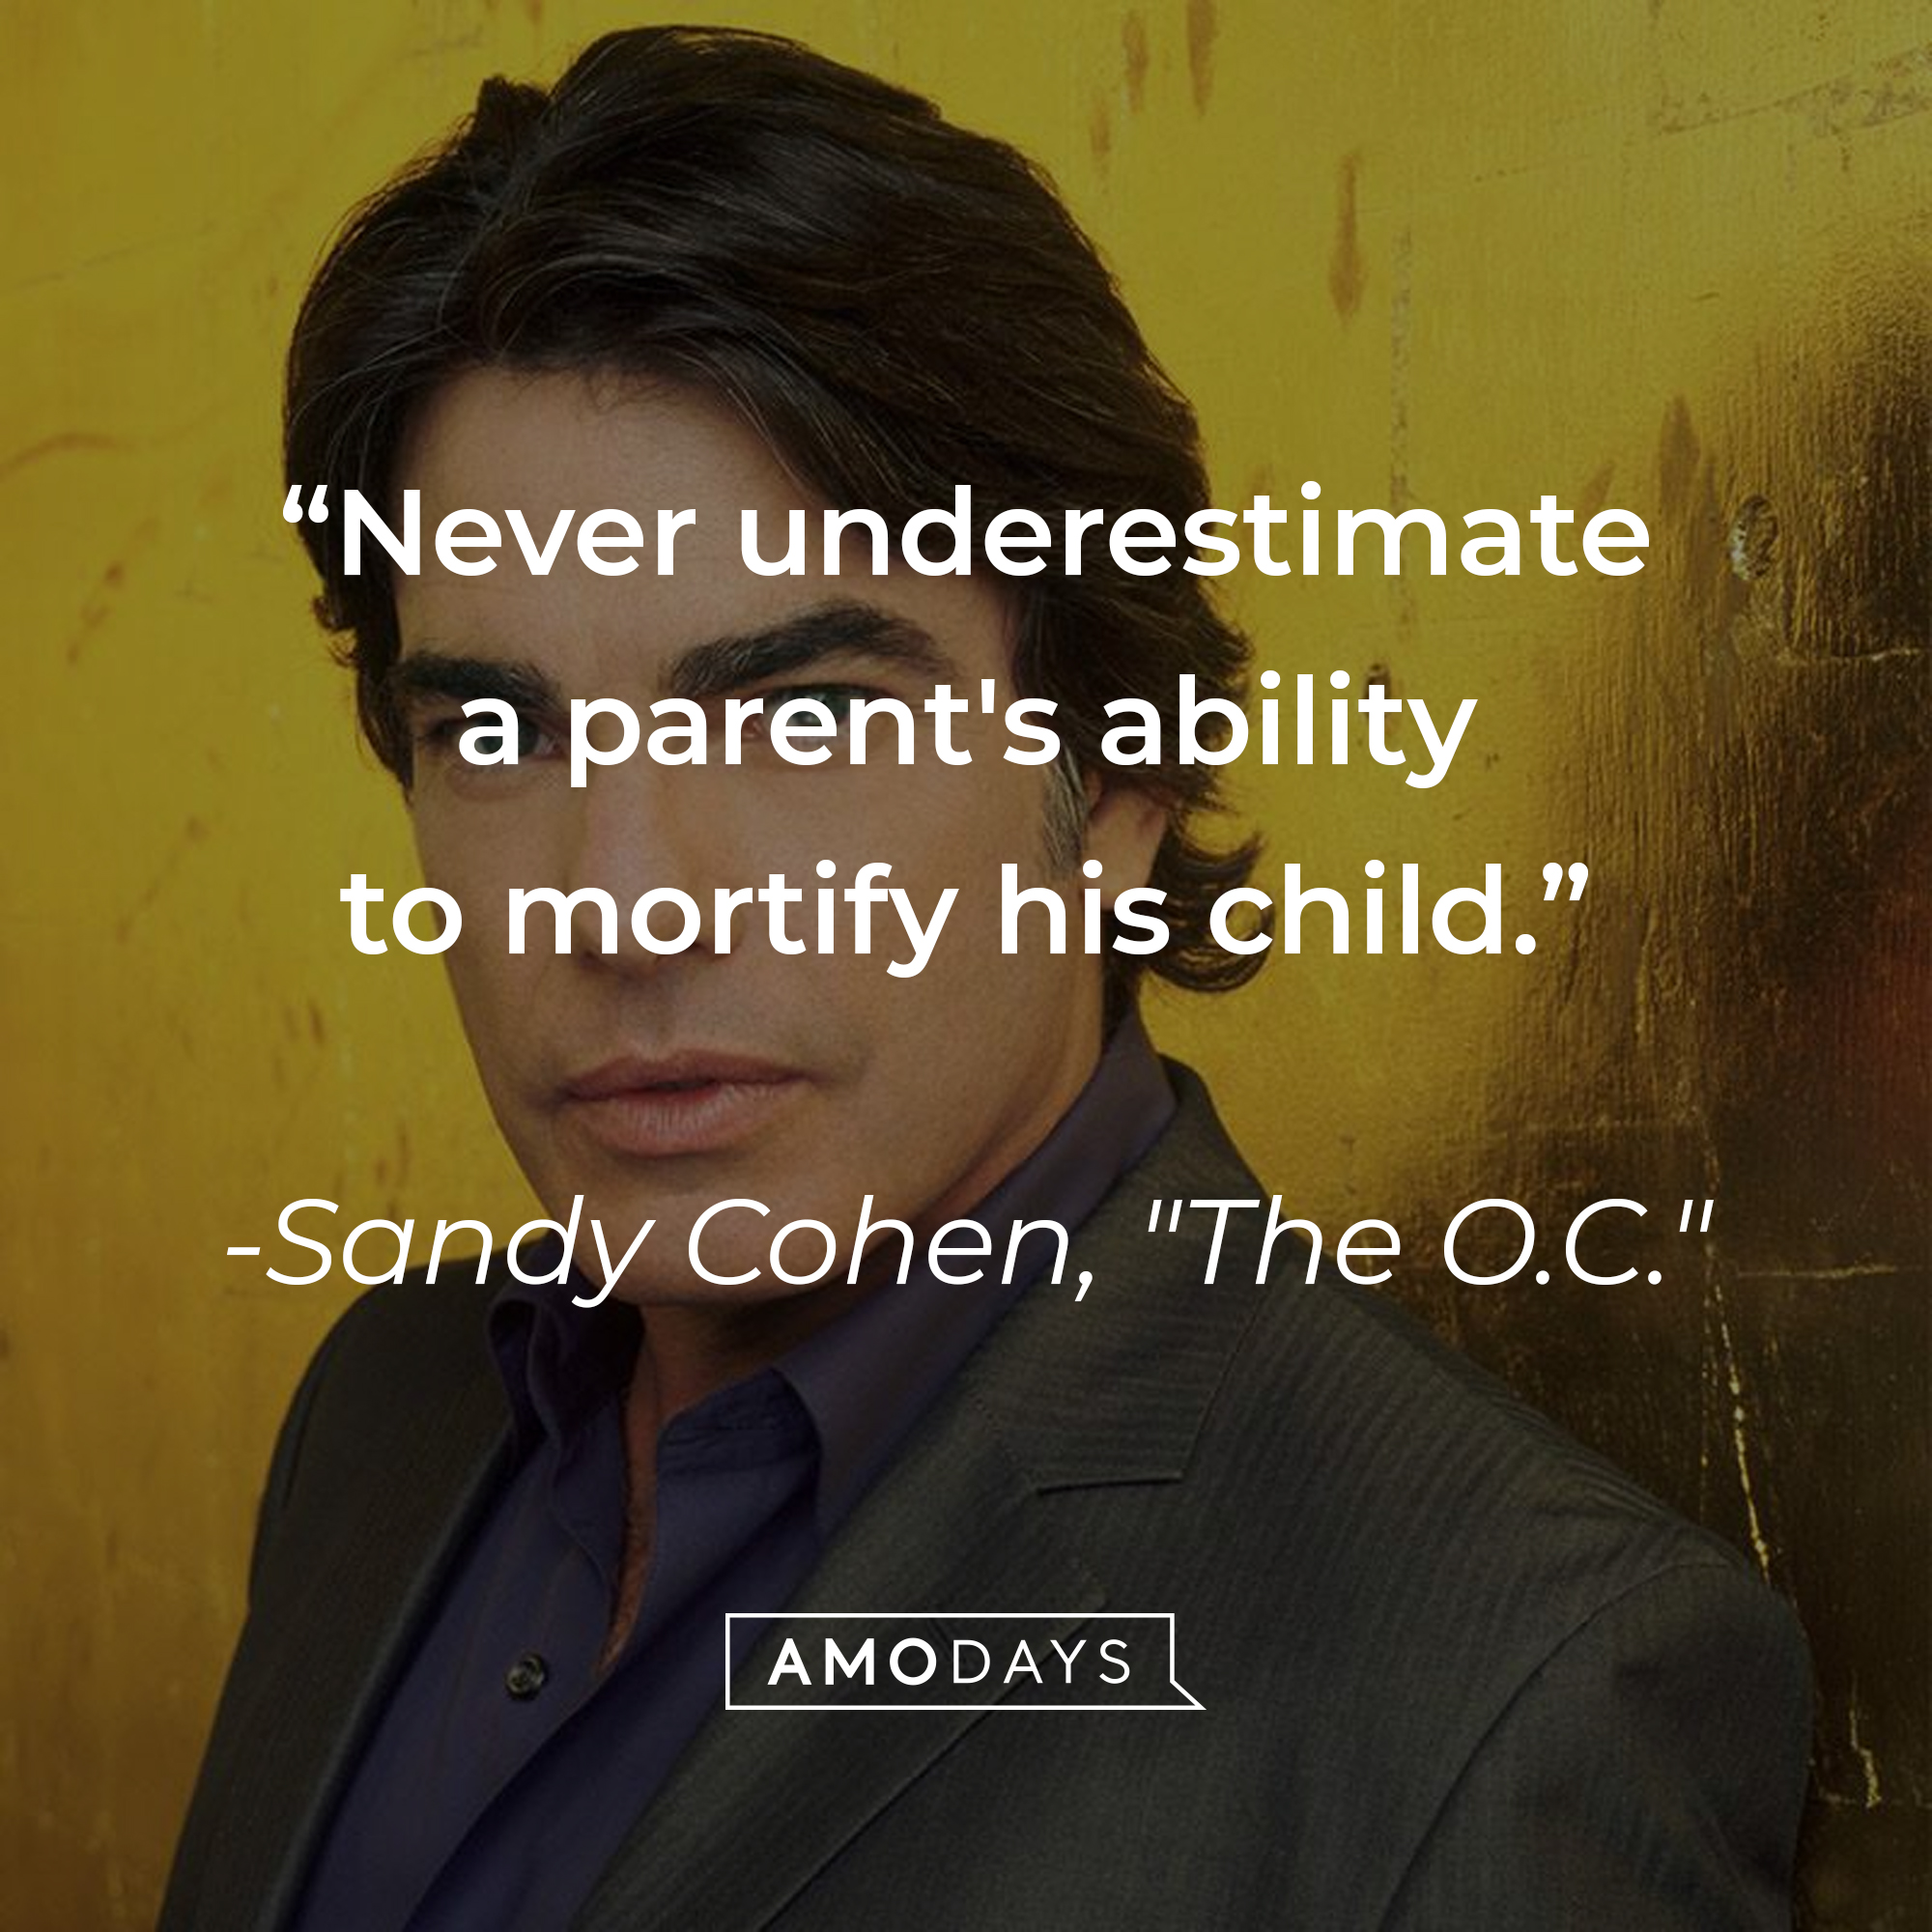 Sandy Cohen's quote: "Never underestimate a parent's ability to mortify his child." | Source: Facebook.com/TheOC